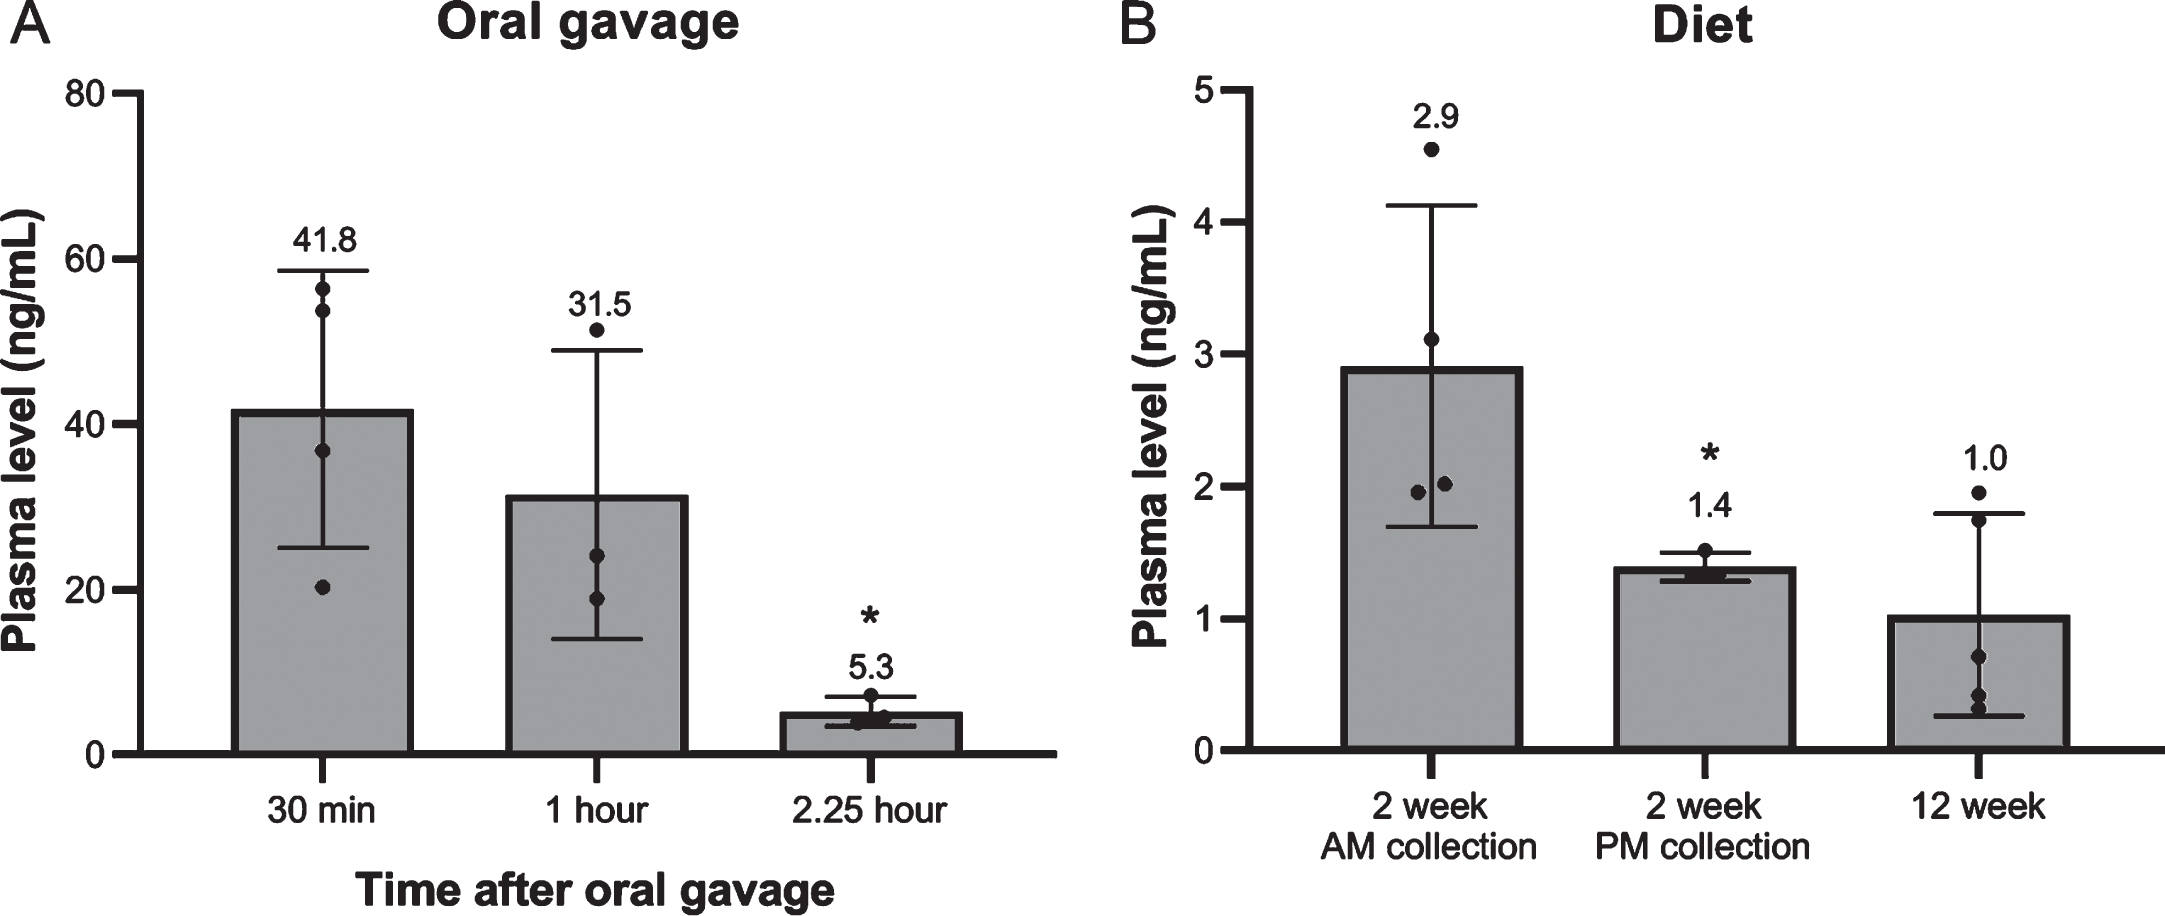 Simvastatin plasma levels. (A) At 30 min, 1 hour and 2.25 hour after single oral gavage (8 mg/kg) (n = 3–4). (B) After 2 week (AM/PM plasma collection) and 12 week treatment with 80 mg/kg simvastatin in the diet. (n = 5–8). *p < 0.05